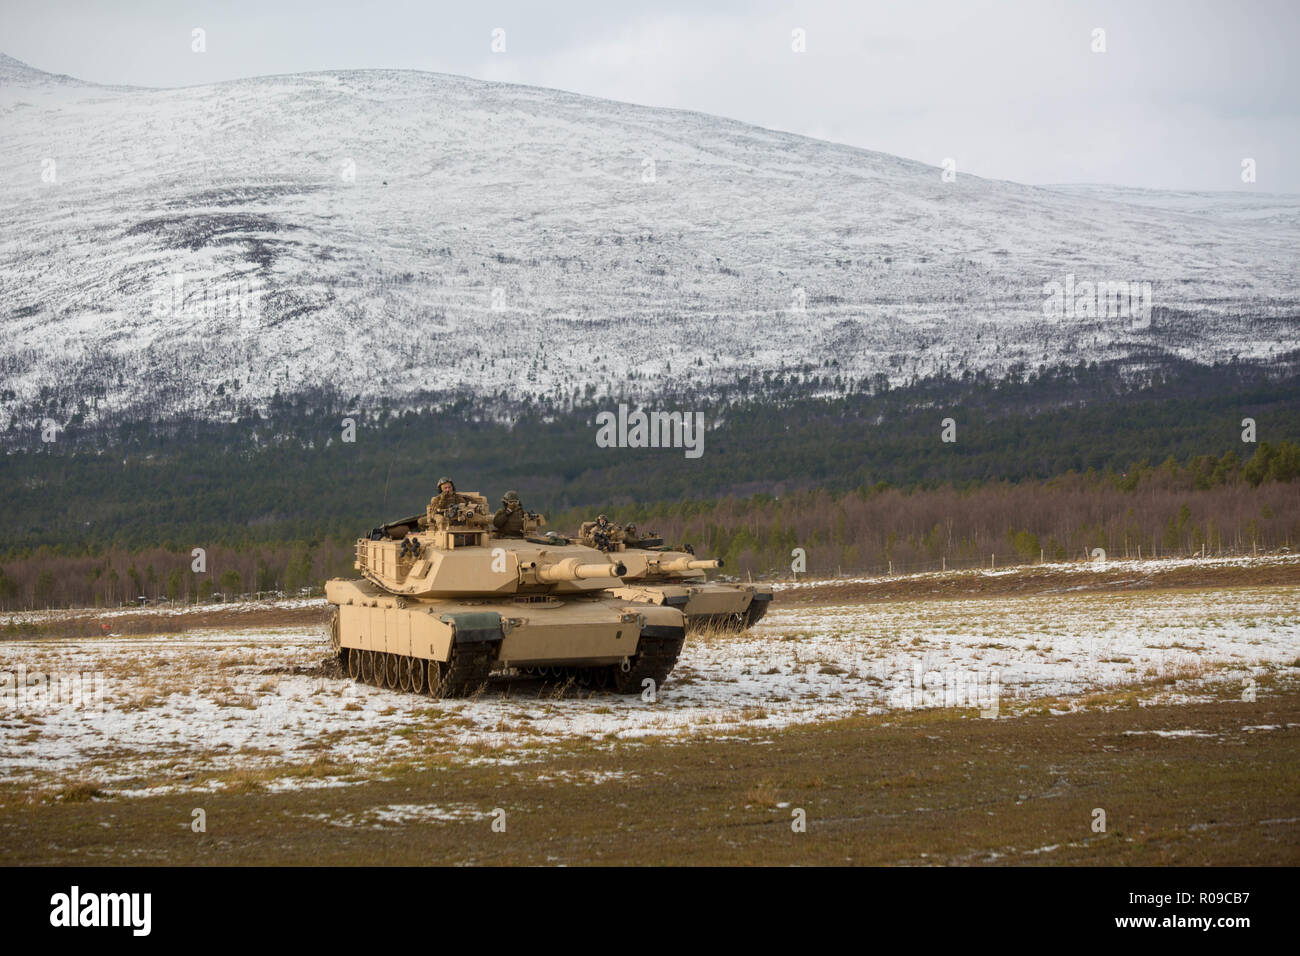 Molde Fjords, Norway. 01st Nov, 2018. U.S. Marines with 2nd Tank Battalion, 2nd Marine Division, position a M1A1 Abrams Battle Tank during Exercise Trident Juncture 18 November 1, 2018 in Oppdal, Norway. The multi-national exercise is the largest NATO exercise since 2015, and includes more than 50,000 military members from 31 countries. Credit: Planetpix/Alamy Live News Stock Photo